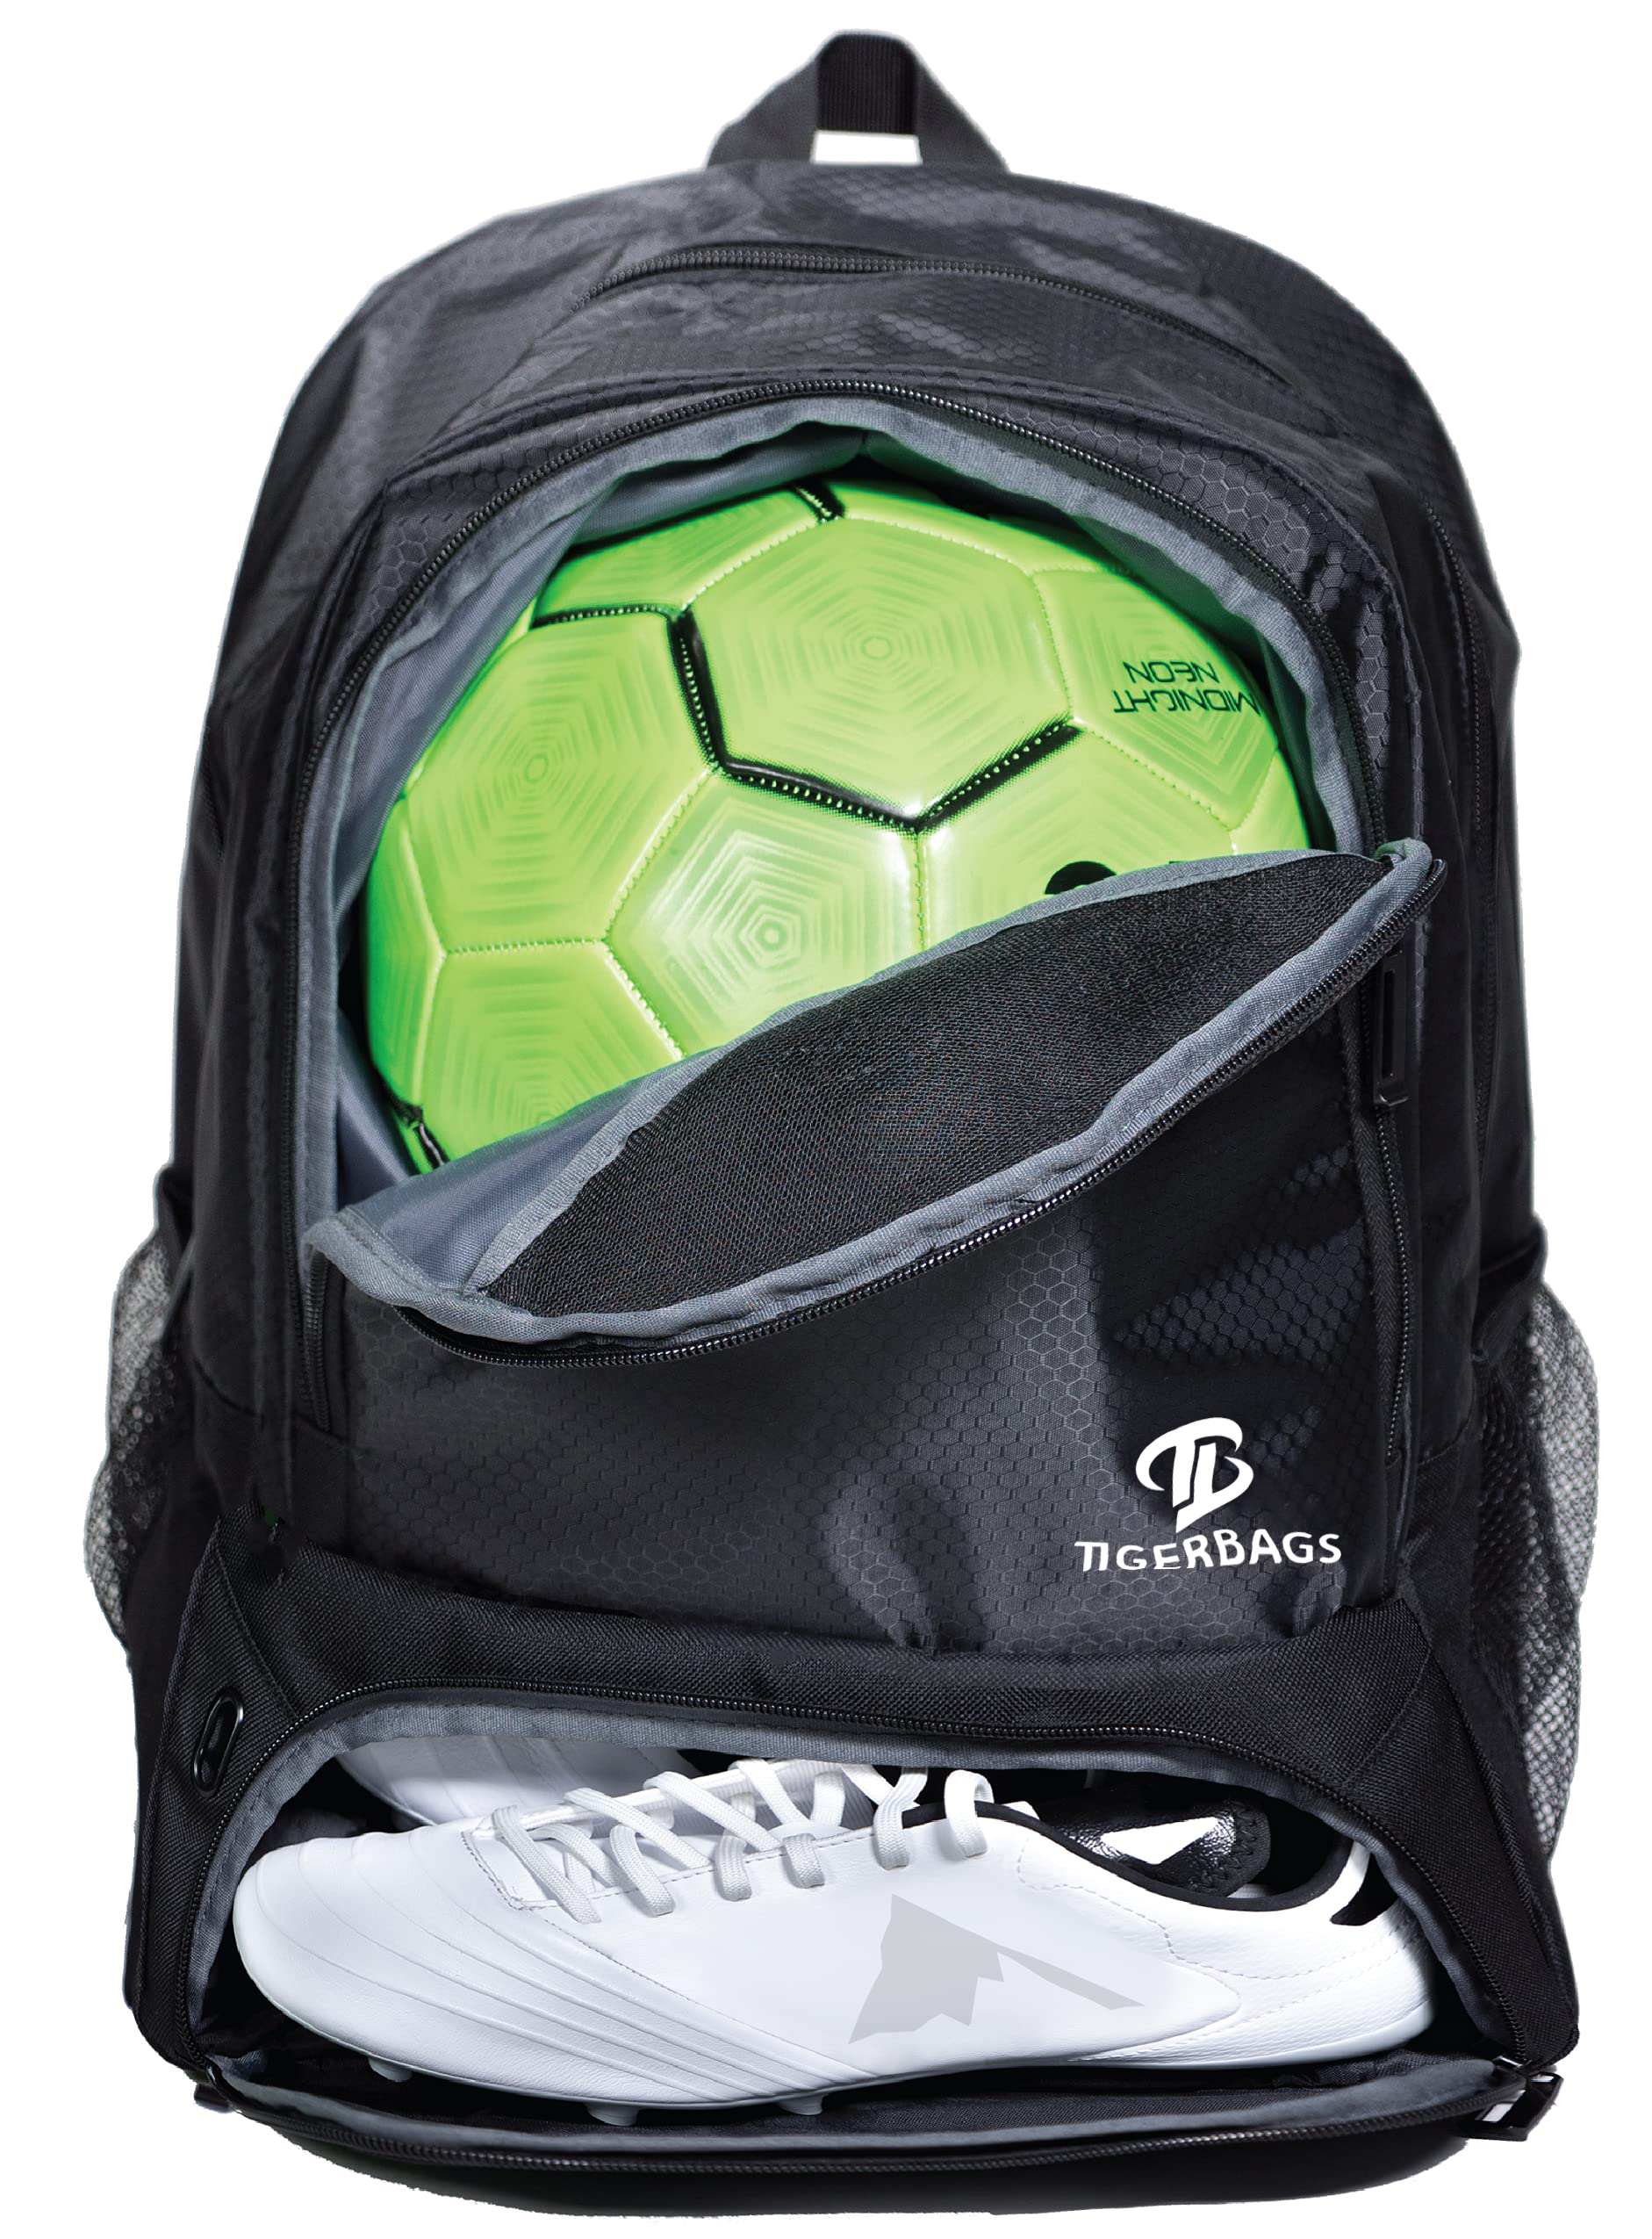 Soccer bag basketball volleyball bag separate sandwich can be customized bag